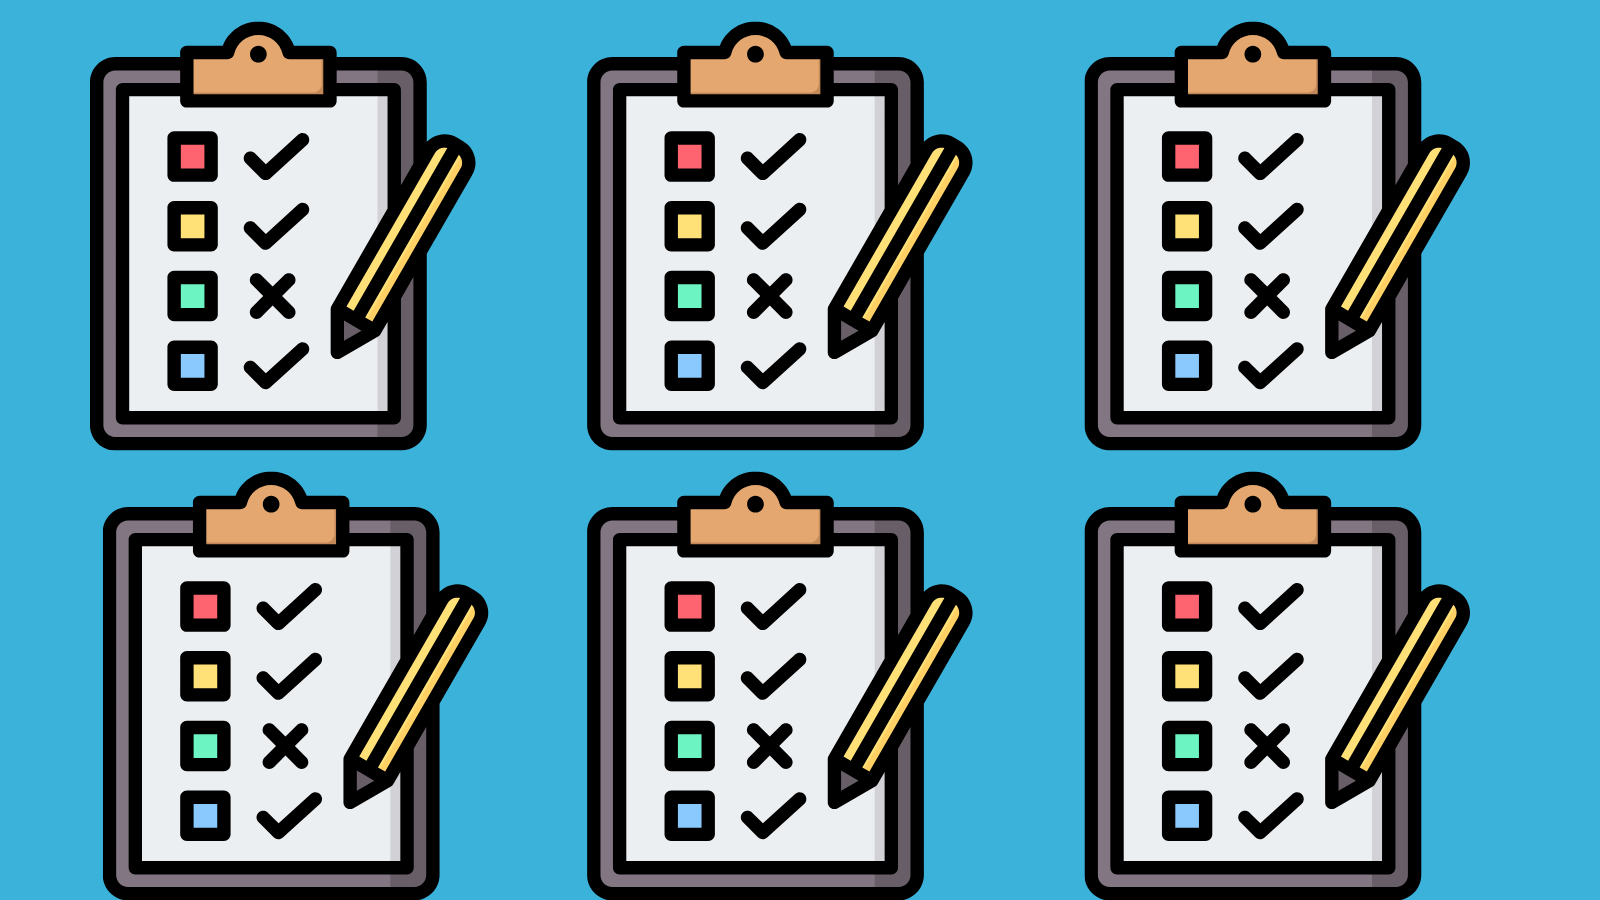 Six clipboards with checklists